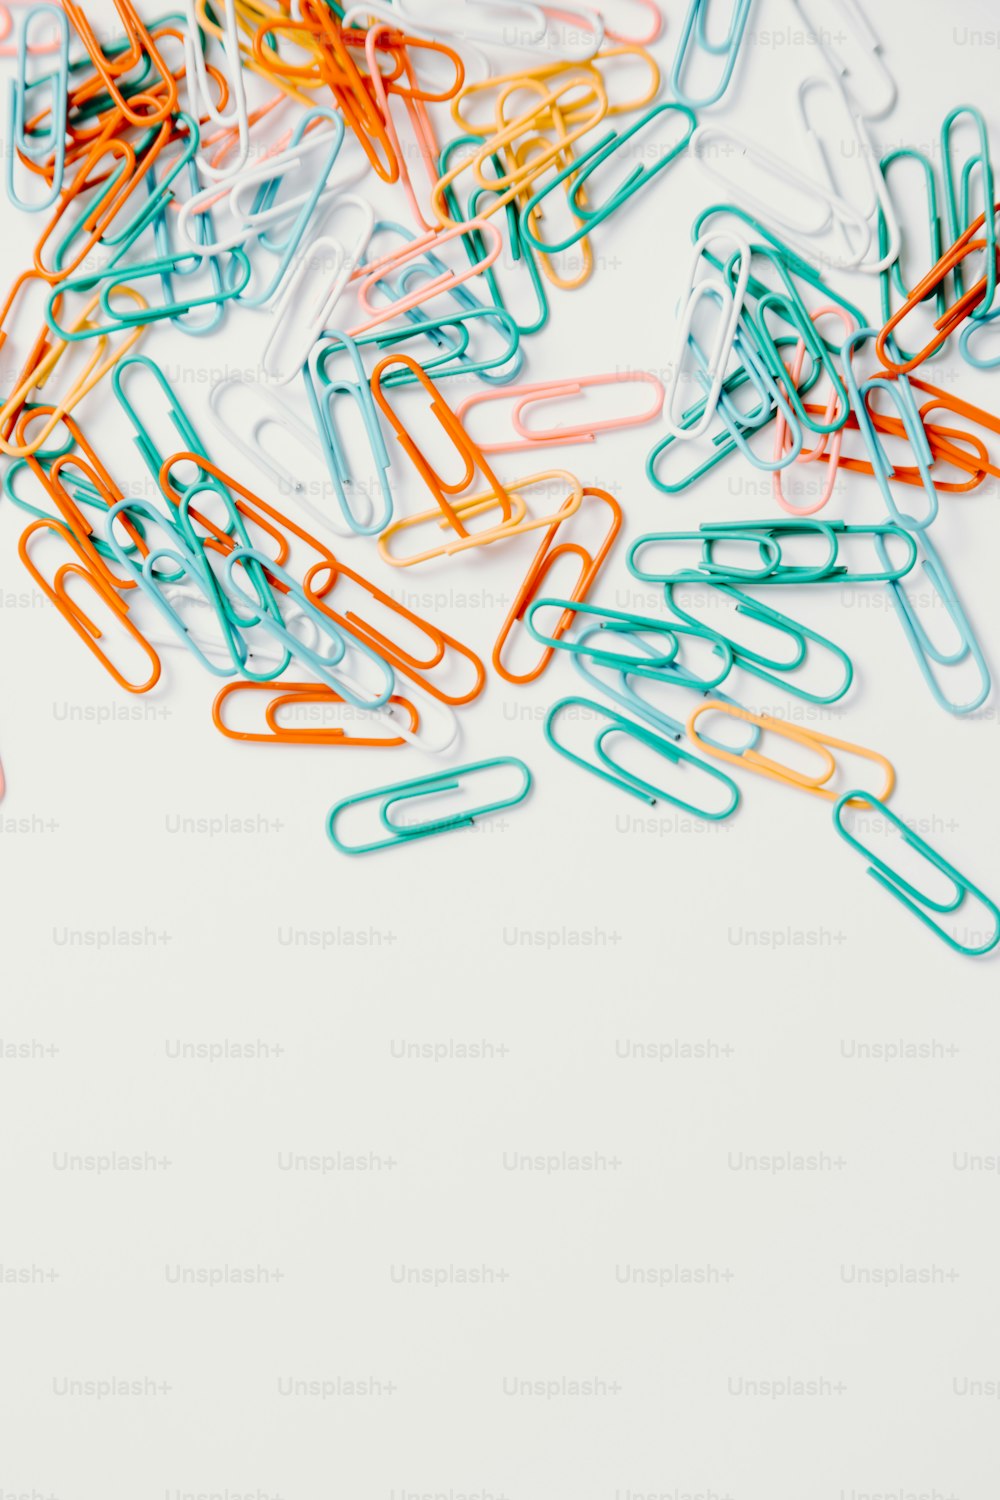 a pile of colored paper clips on a white surface